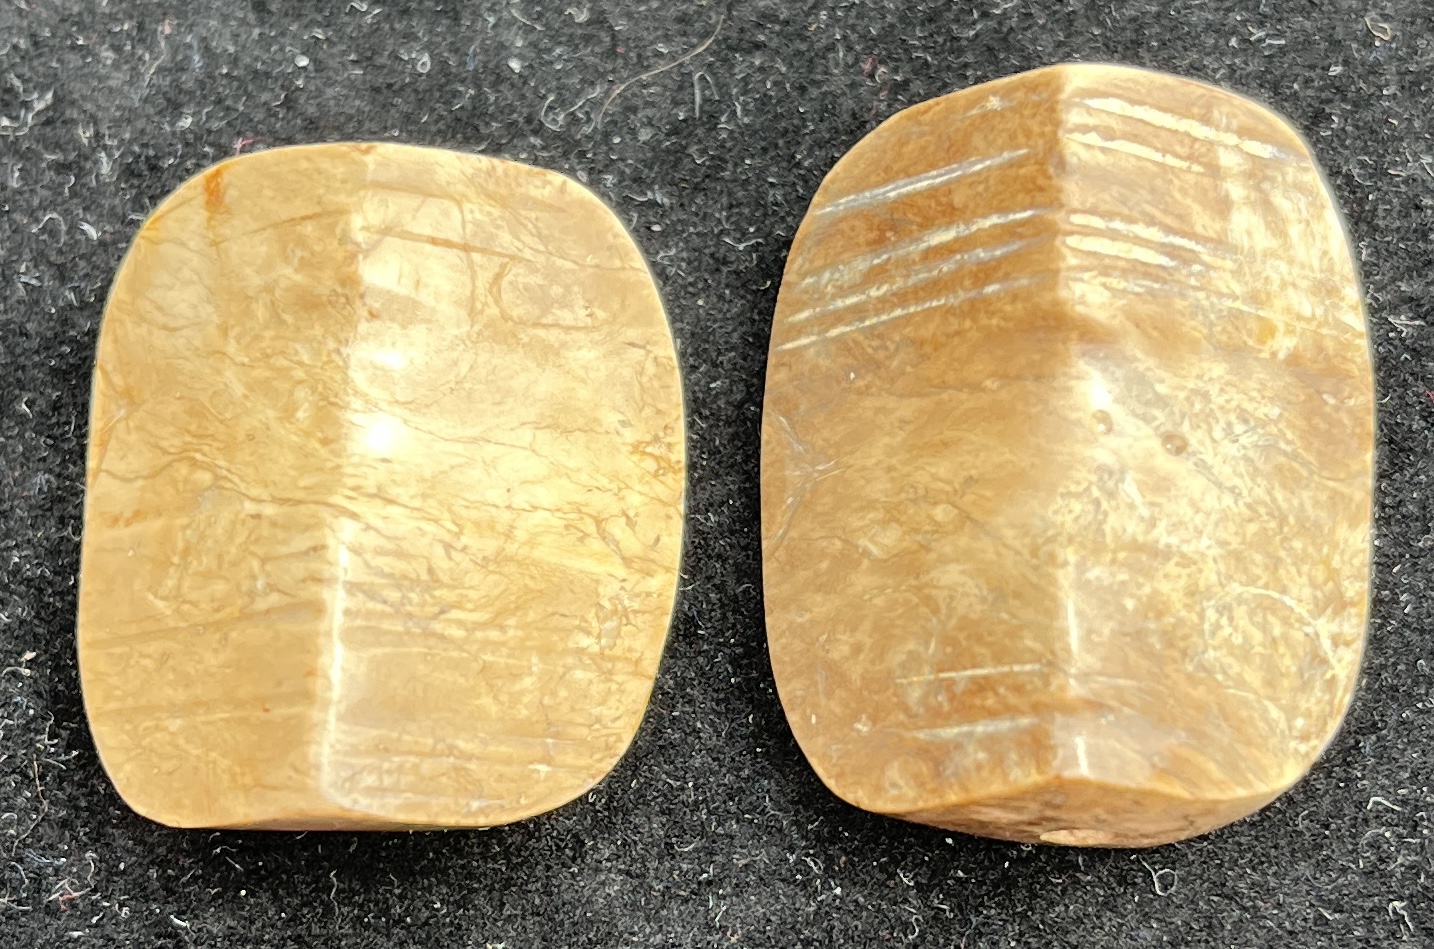 TWO CHINESE JADE CONG PENDANT FRAGMENTS, LIANGZHU CULTURE, 3300 – 2300 BC - Image 6 of 7